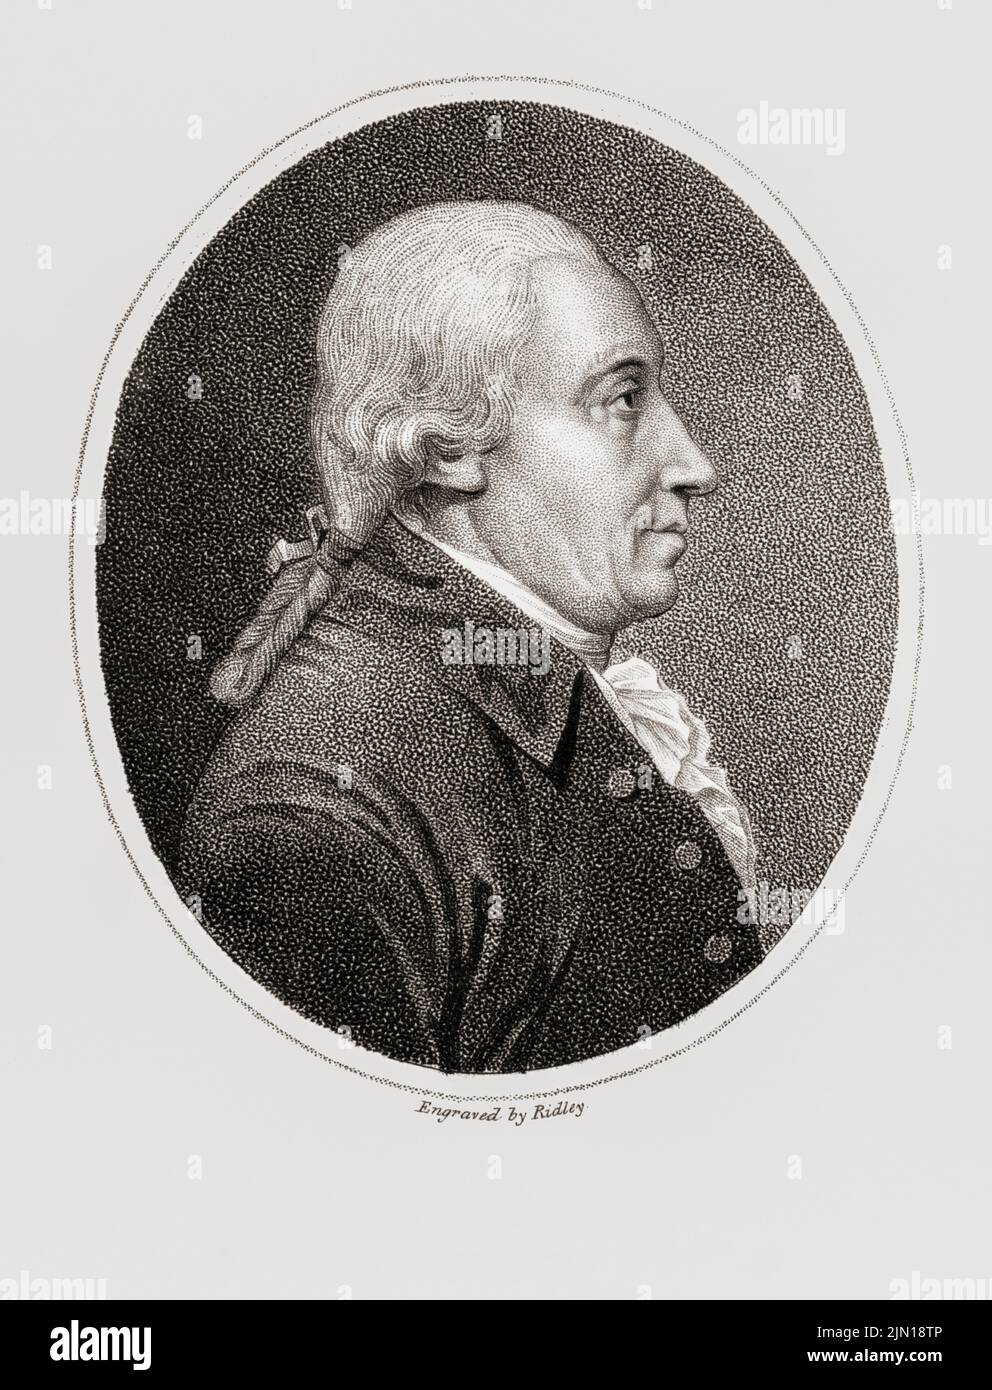 Reverend John Home, 1722 - 1808.  Scottish minister, soldier and author of the play Douglas.  After a 19th century engraving by Ridley. Stock Photo